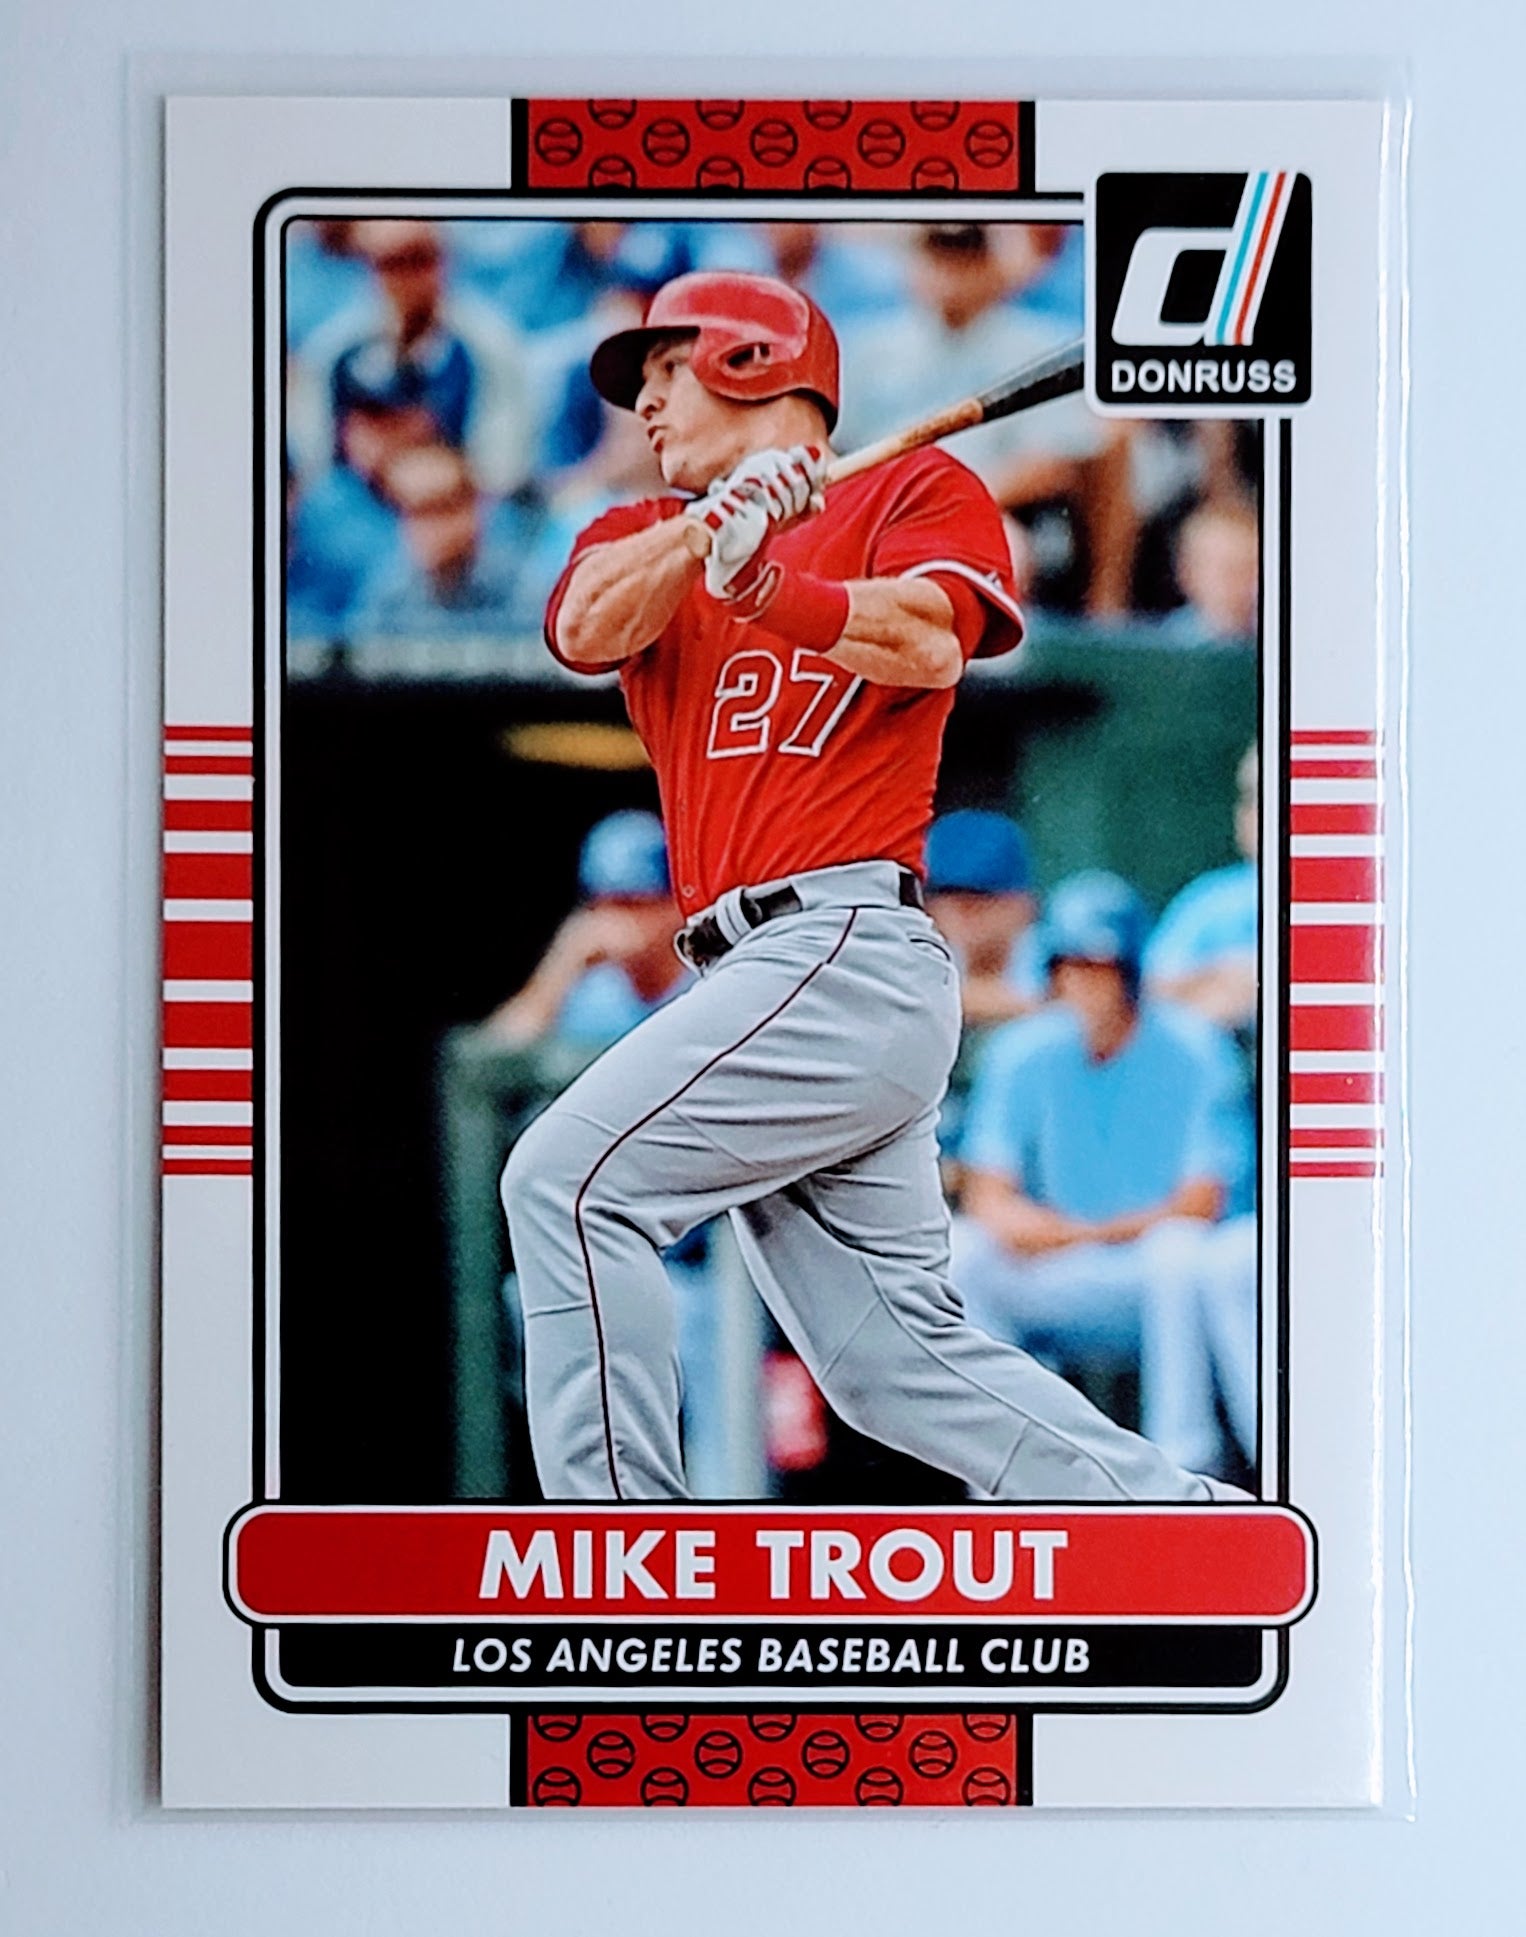 2015 Donruss Mike Trout   Baseball Card  TH13C simple Xclusive Collectibles   